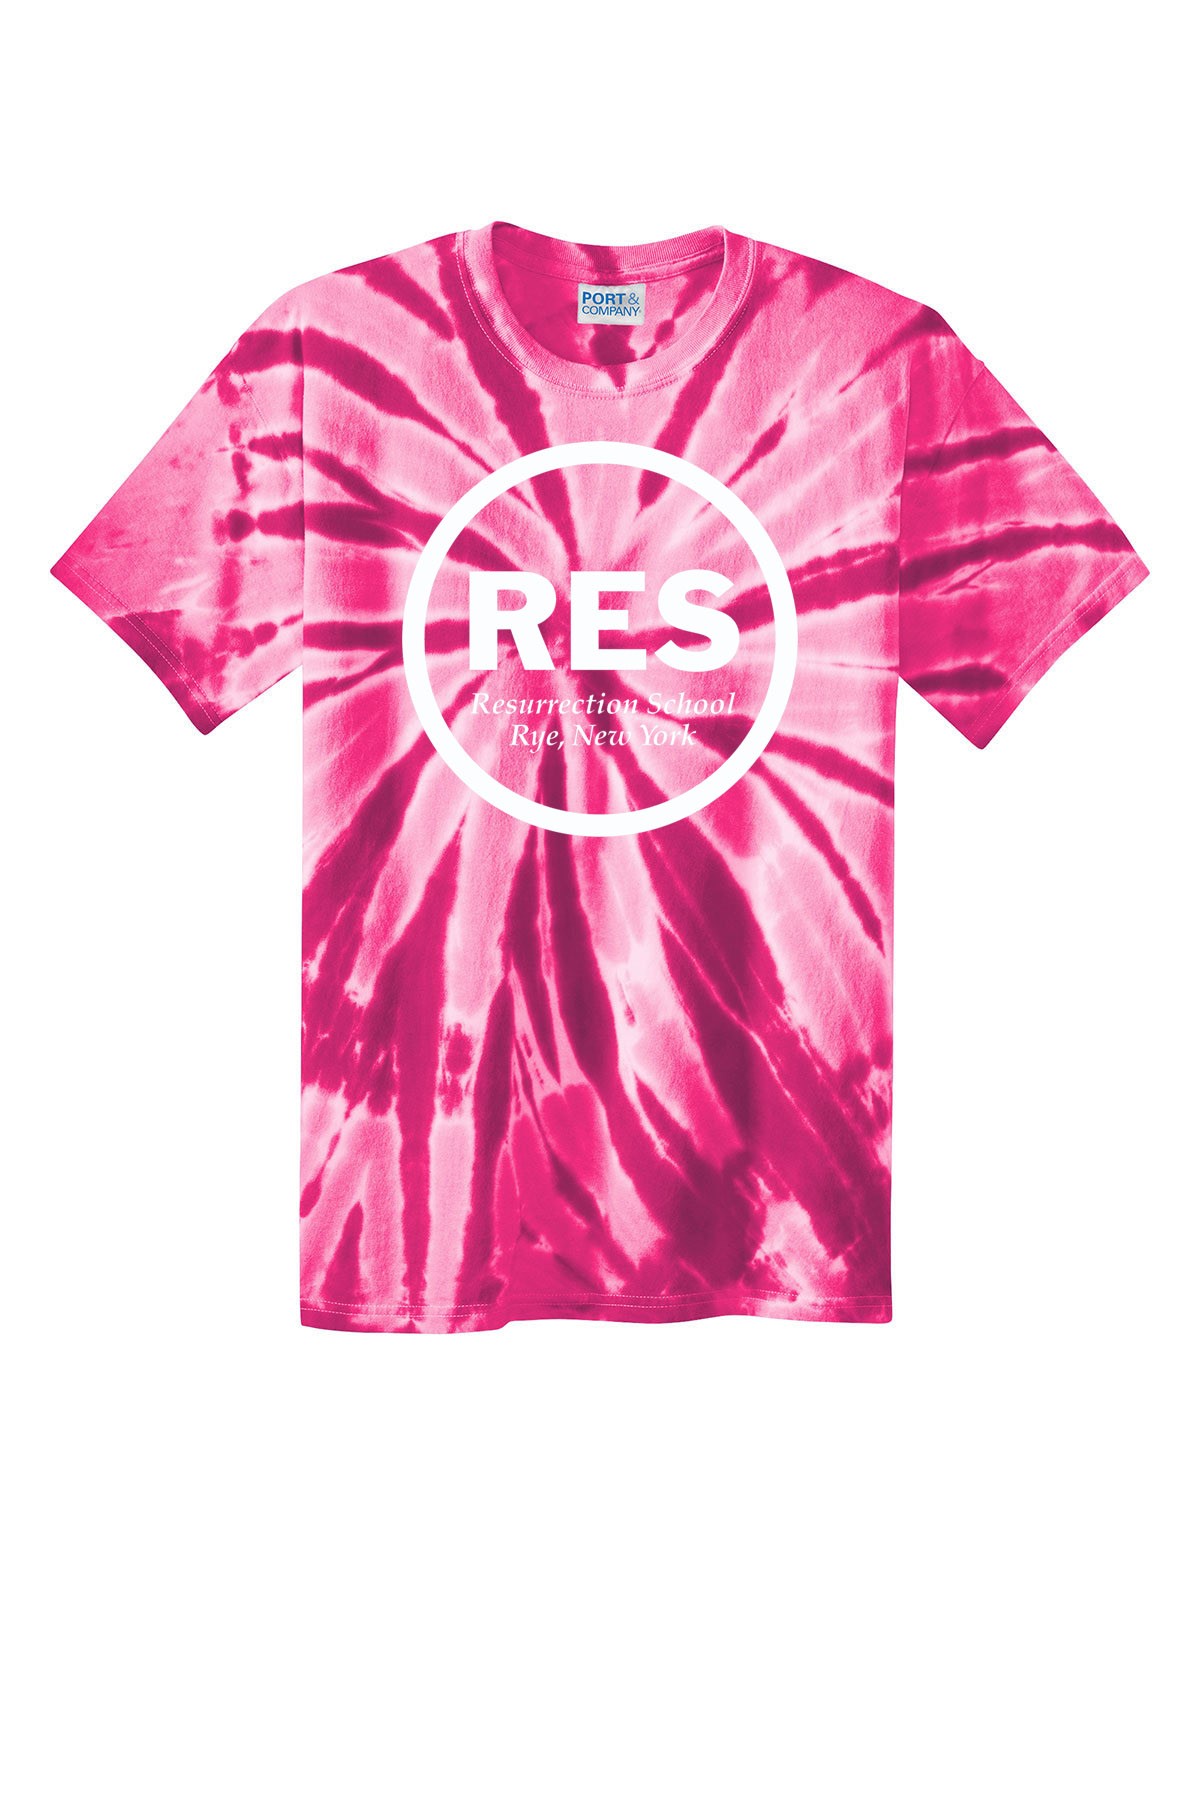 STAFF Resurrection S/S Tie Dye T-Shirt w/ White Logo - Please Allow 2-3 Weeks for Delivery